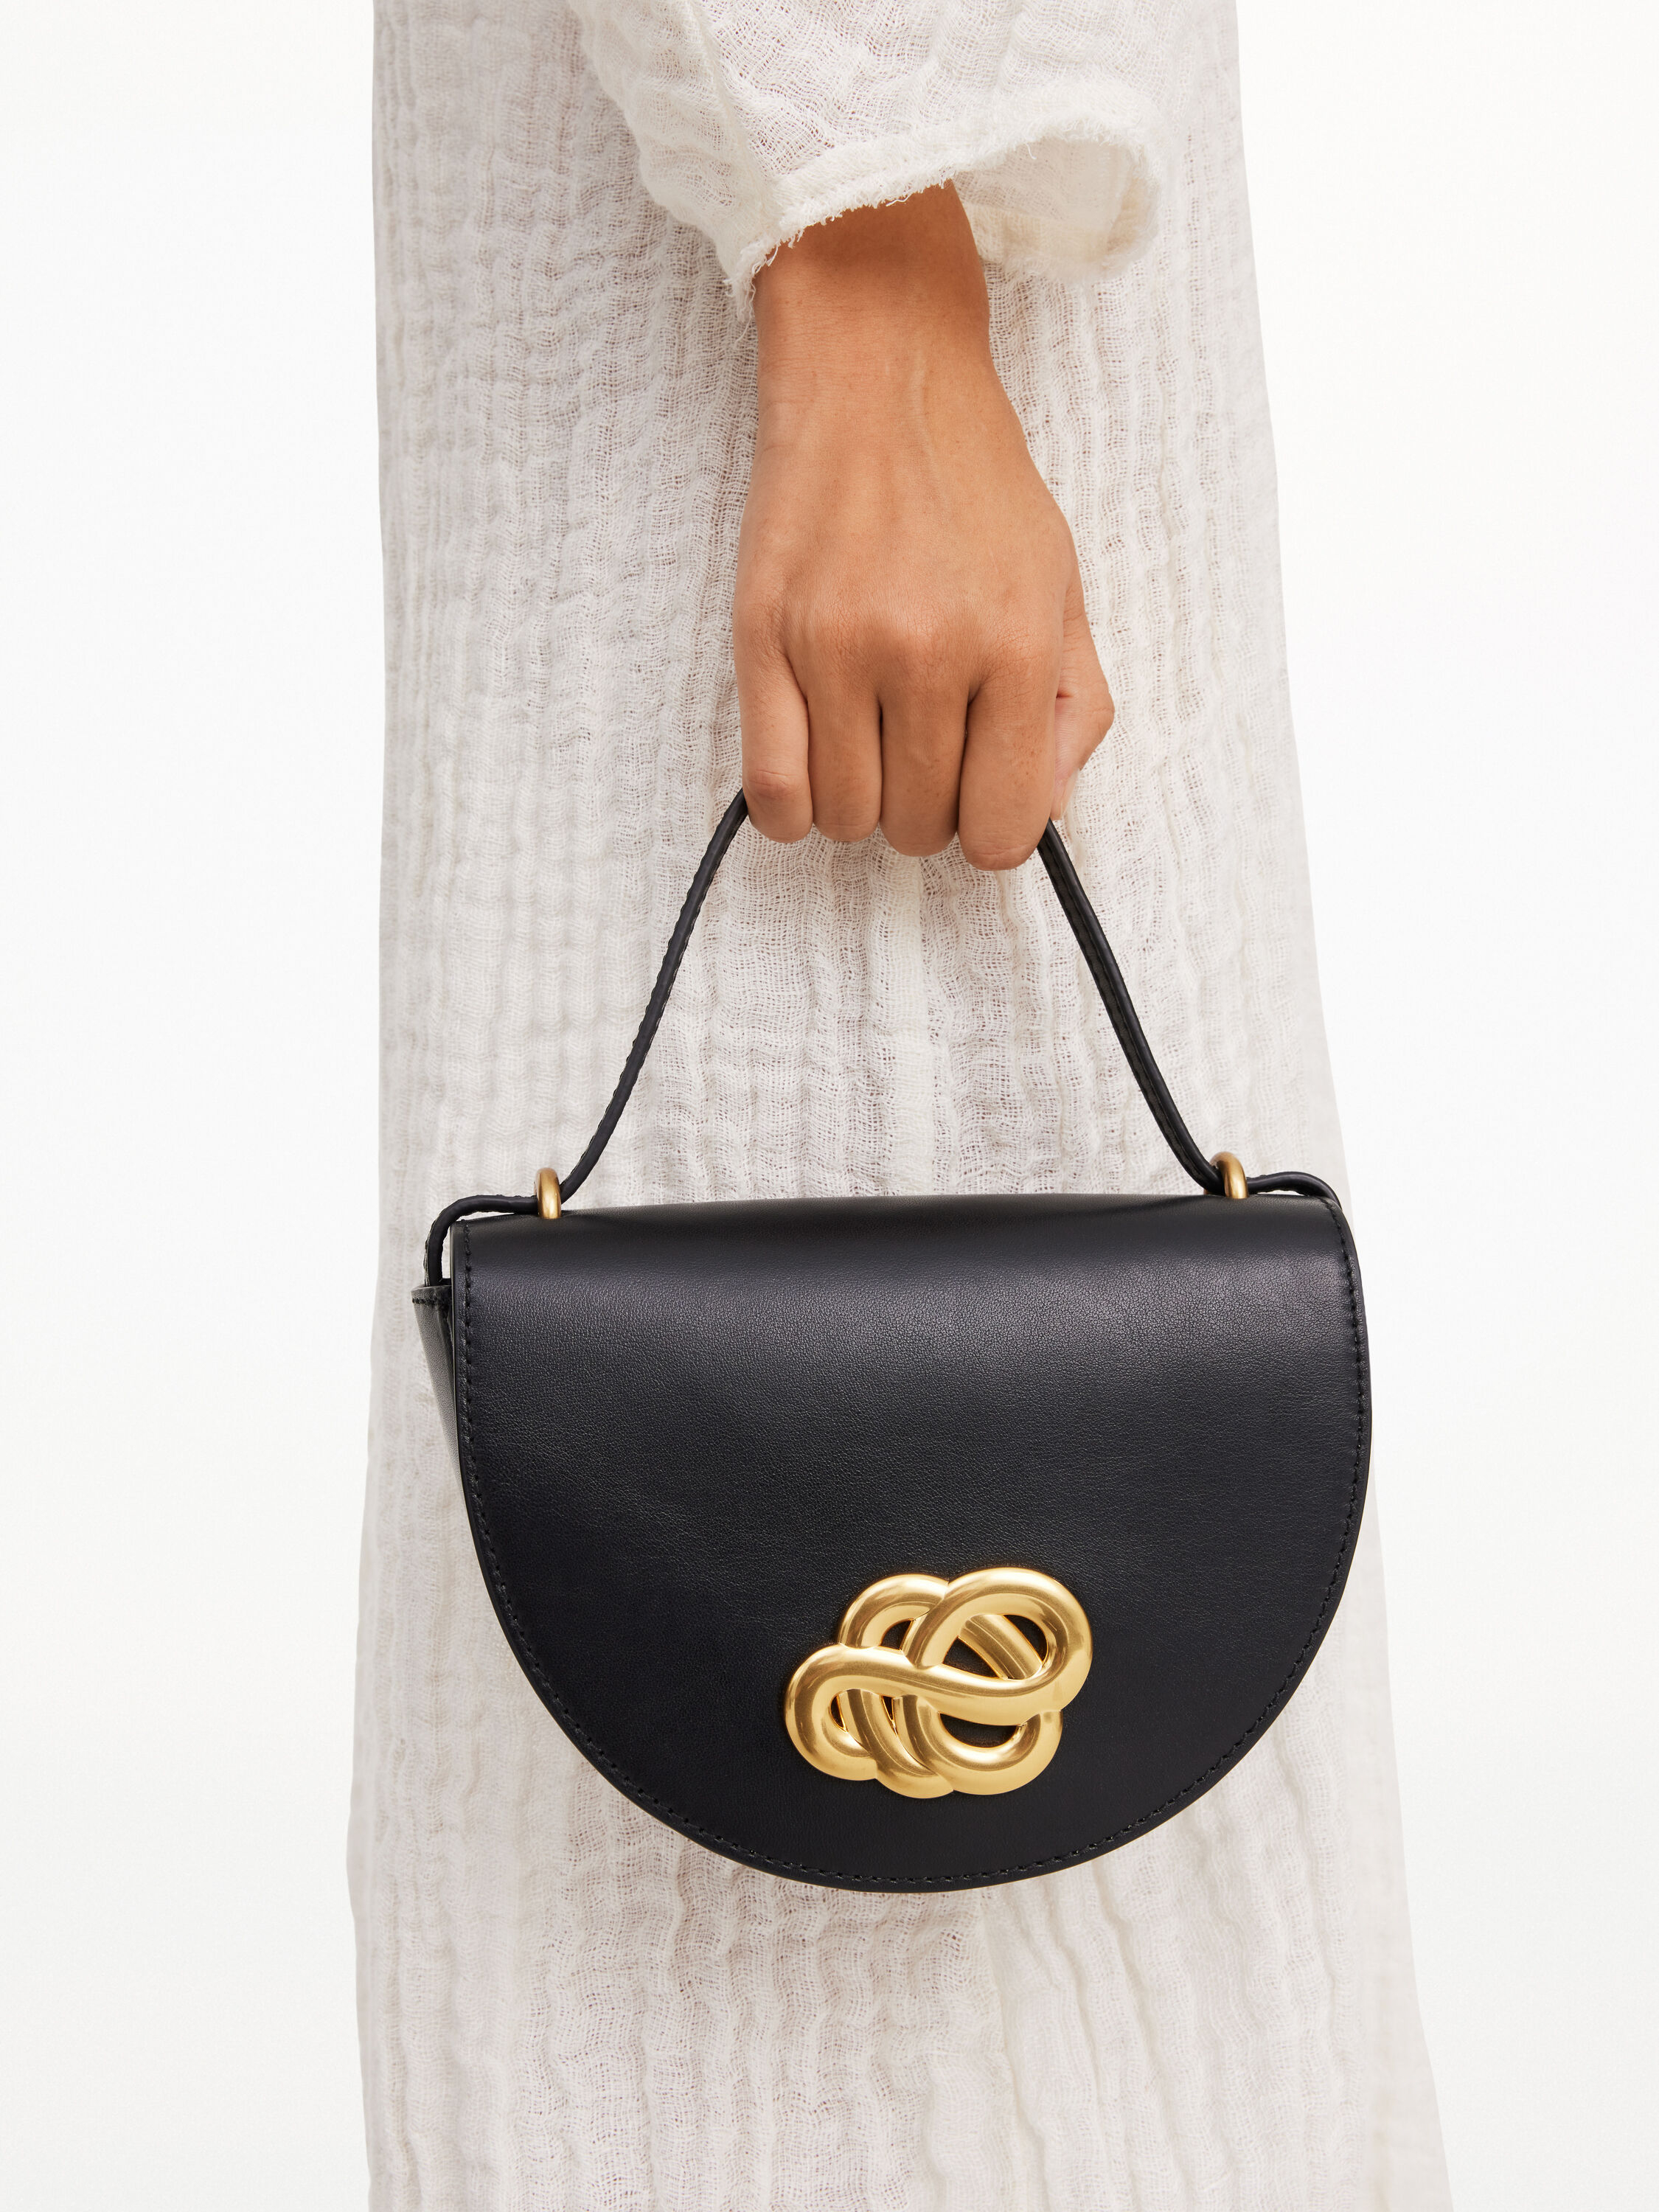 Bags| Find all styles here | By Malene Birger